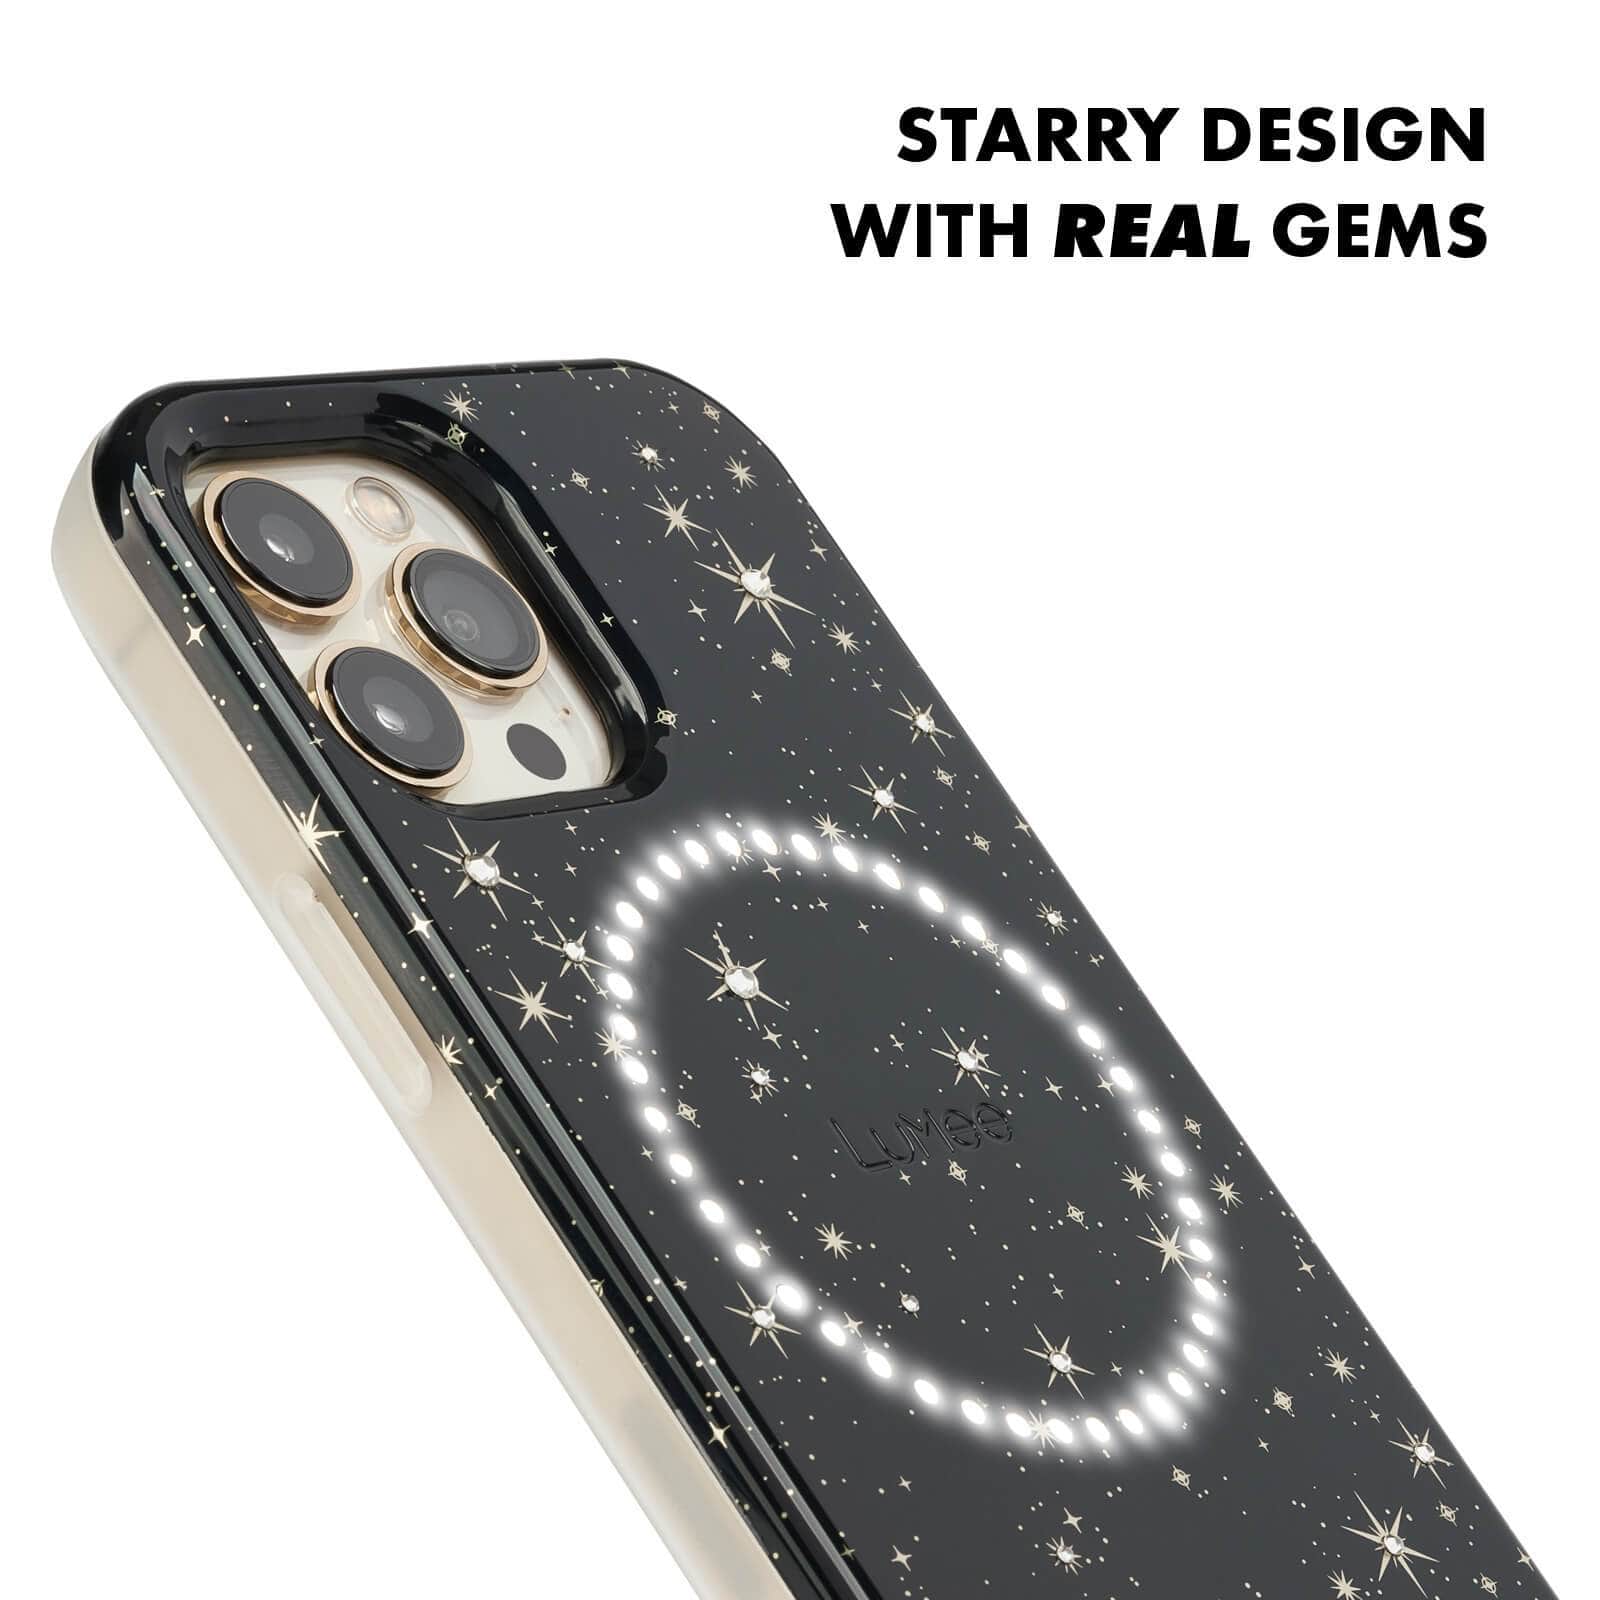 STARRY DESIGN WITH REAL GEMS COLOR::STARS & GEMS